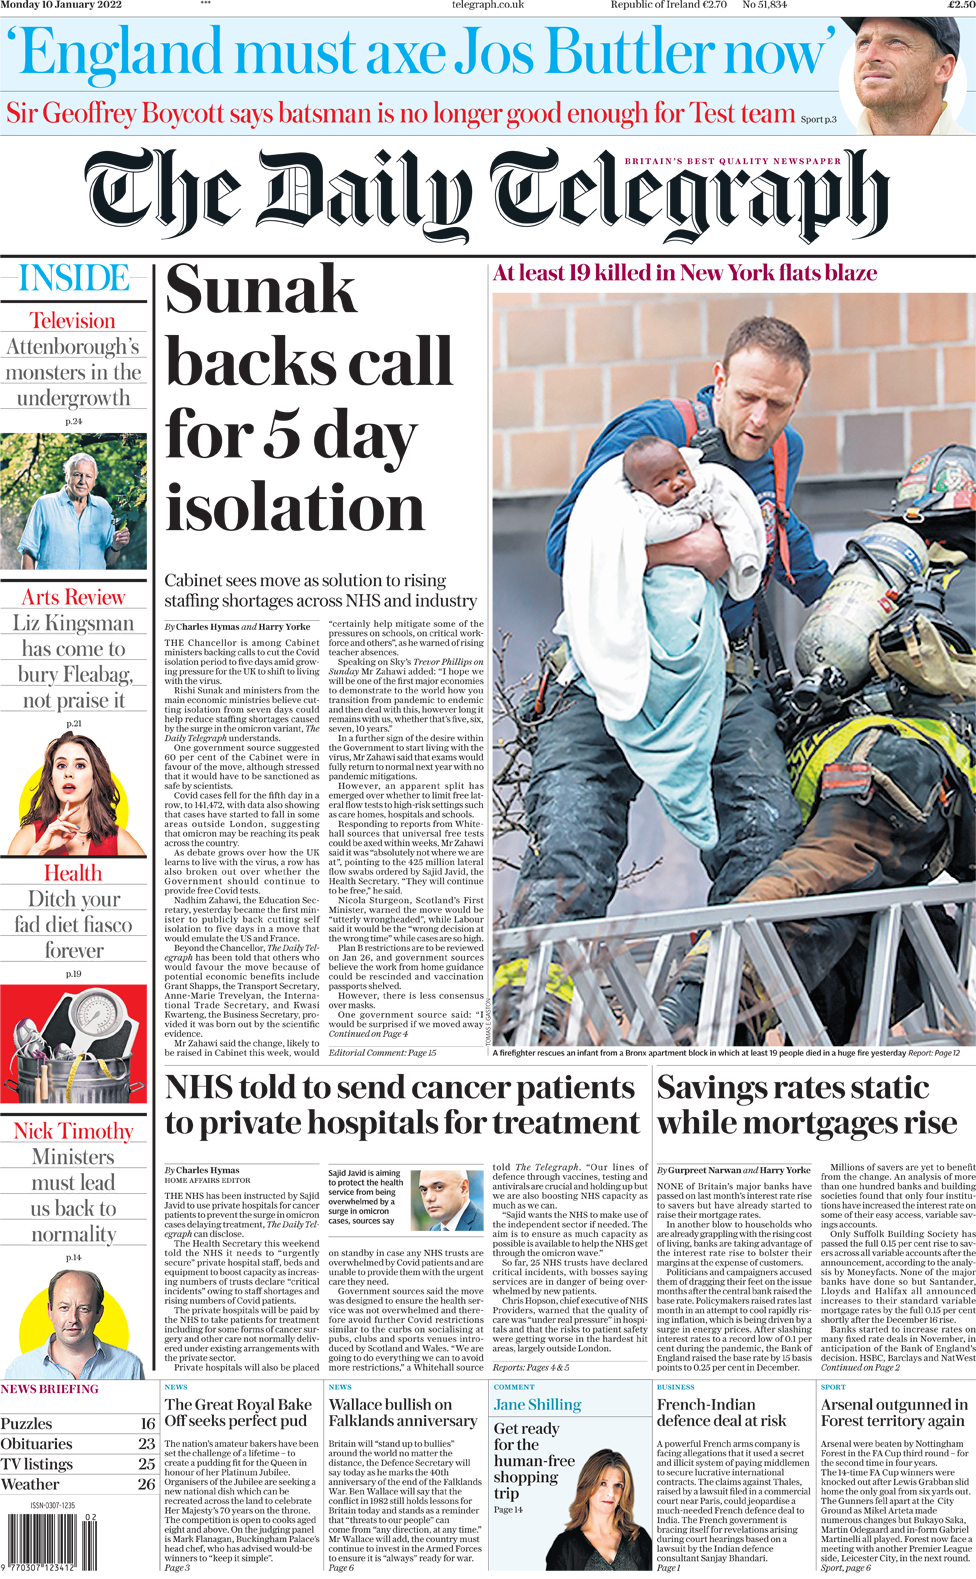 The Daily Telegraph front page 10 January 2022